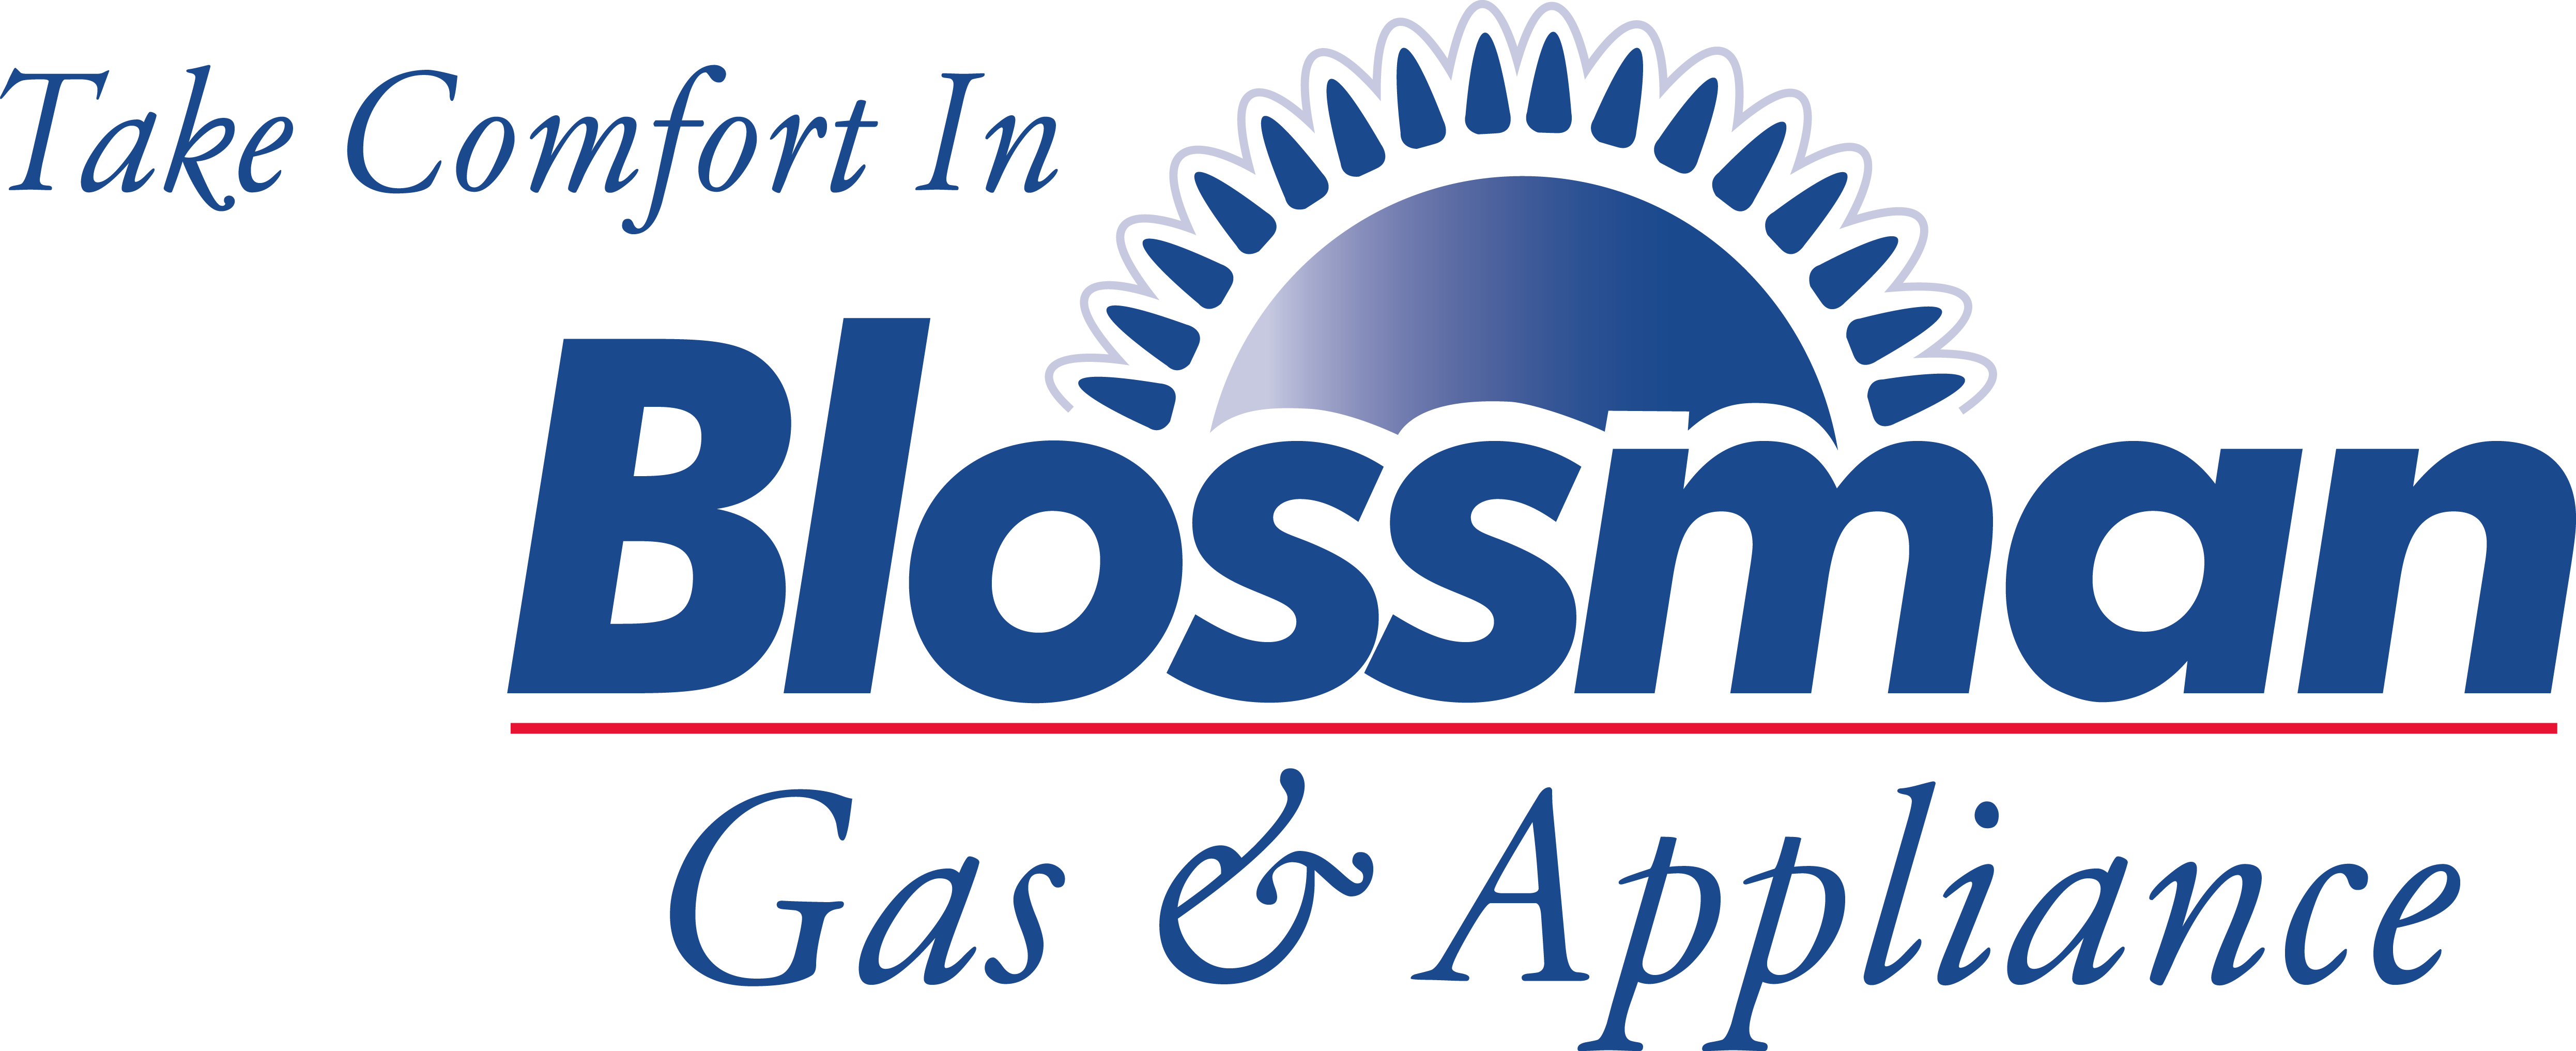 Blossman Gas acquires two Southeast propane companies making it largest family owned LPG company in USA reports BPN Feb 6 2020